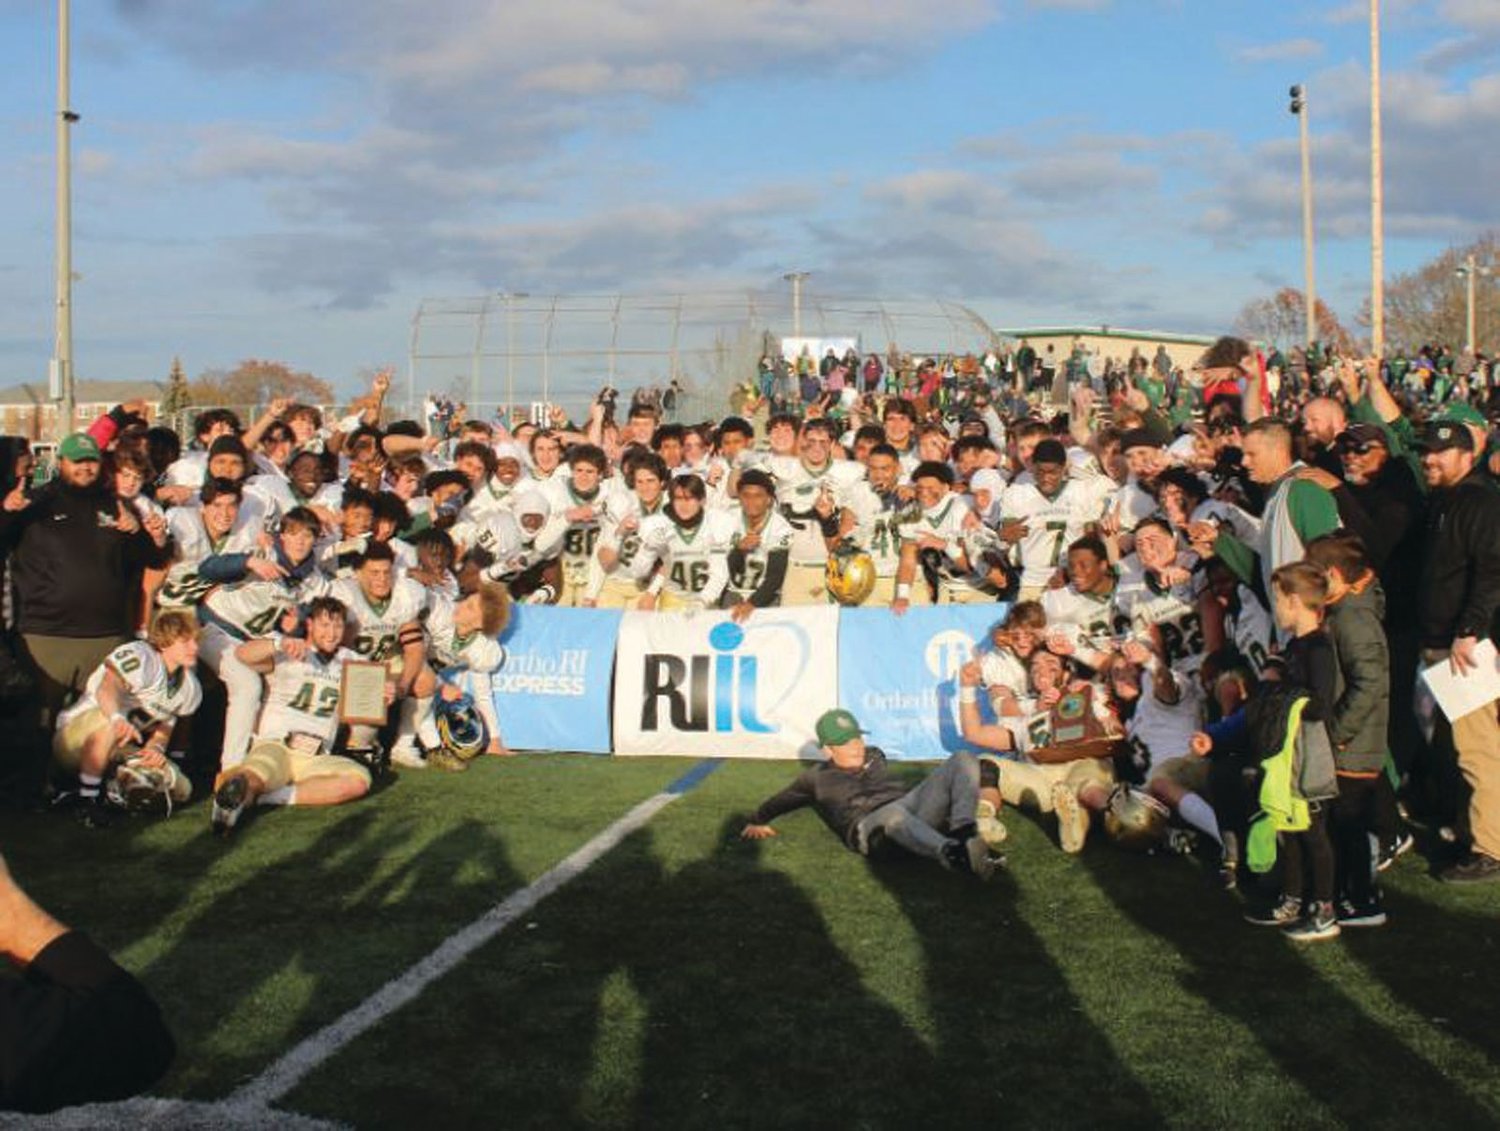 TEAM OF THE YEAR: The Bishop Hendricken football team after winning the state championship.